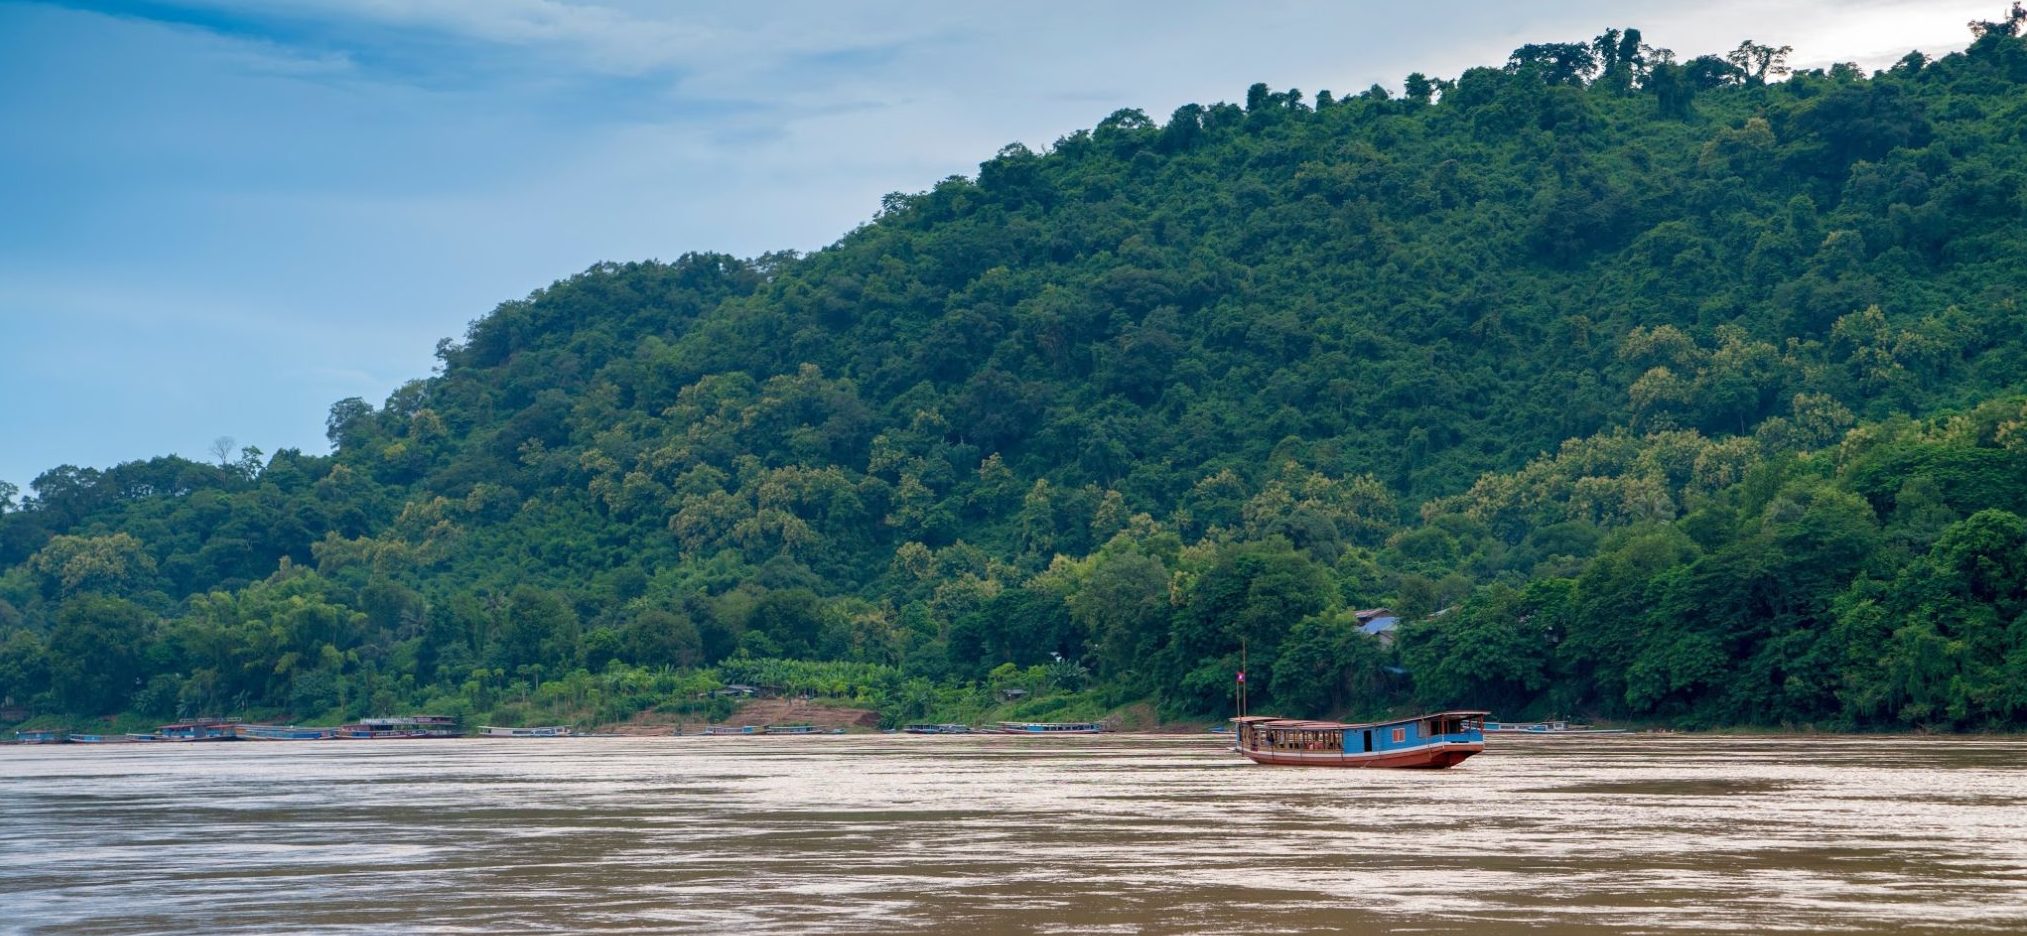 A slow boat on the Mekong River with a tree covered hill in the background